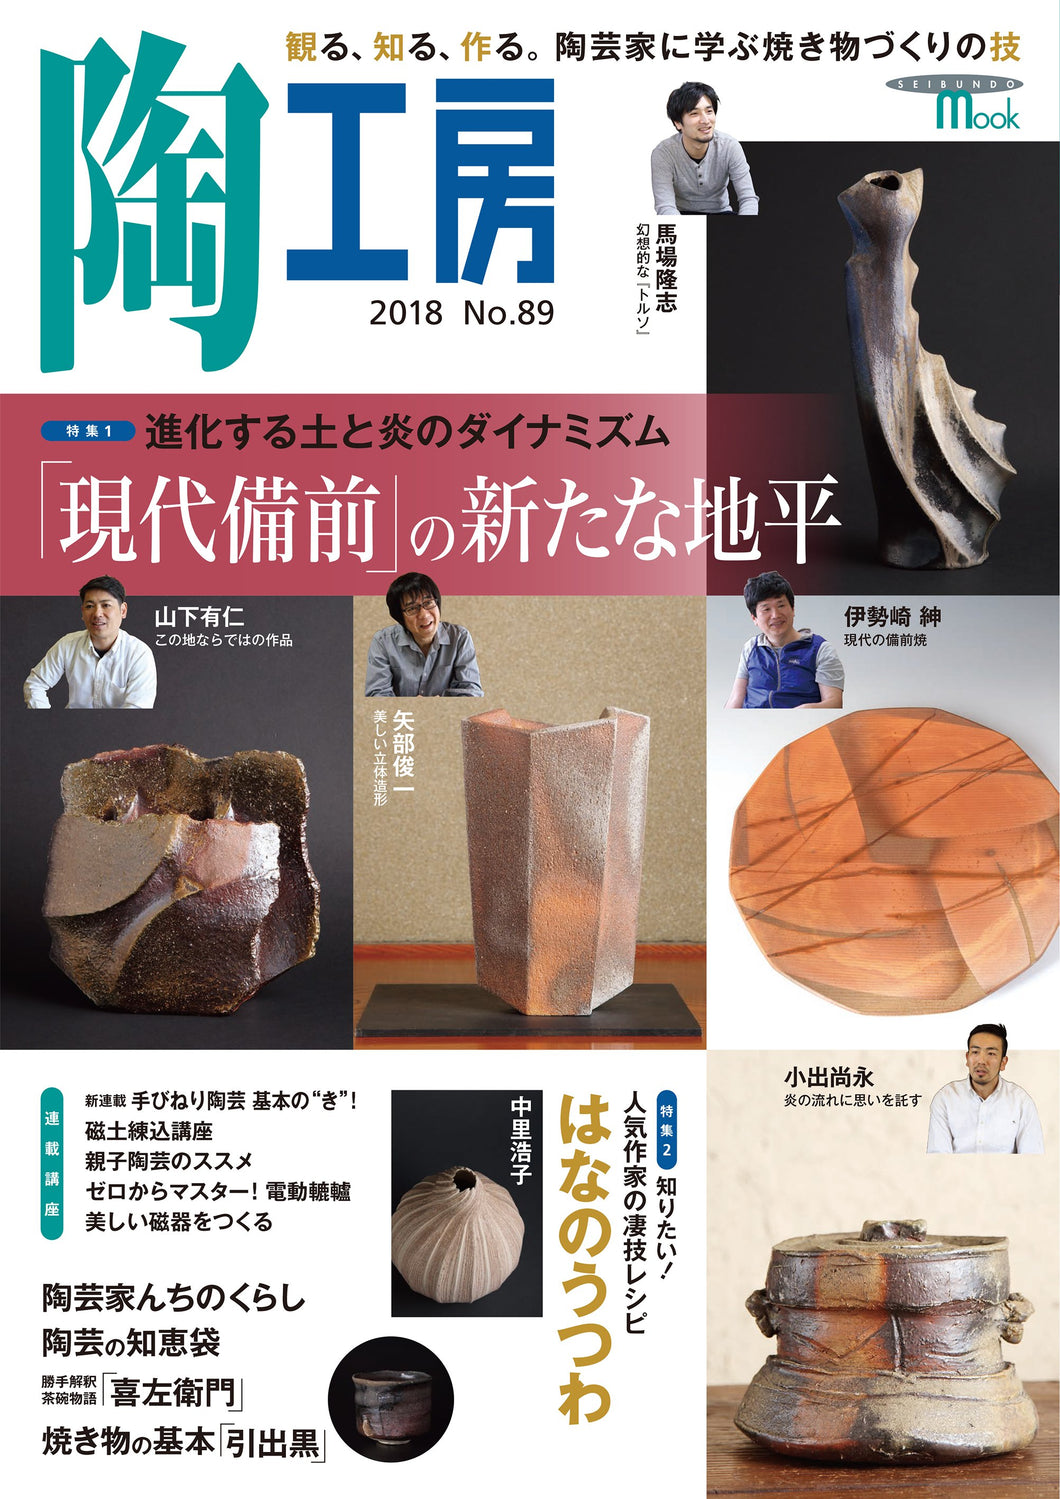 Pottery studio No.89 Tradition and innovation of Bizen ware